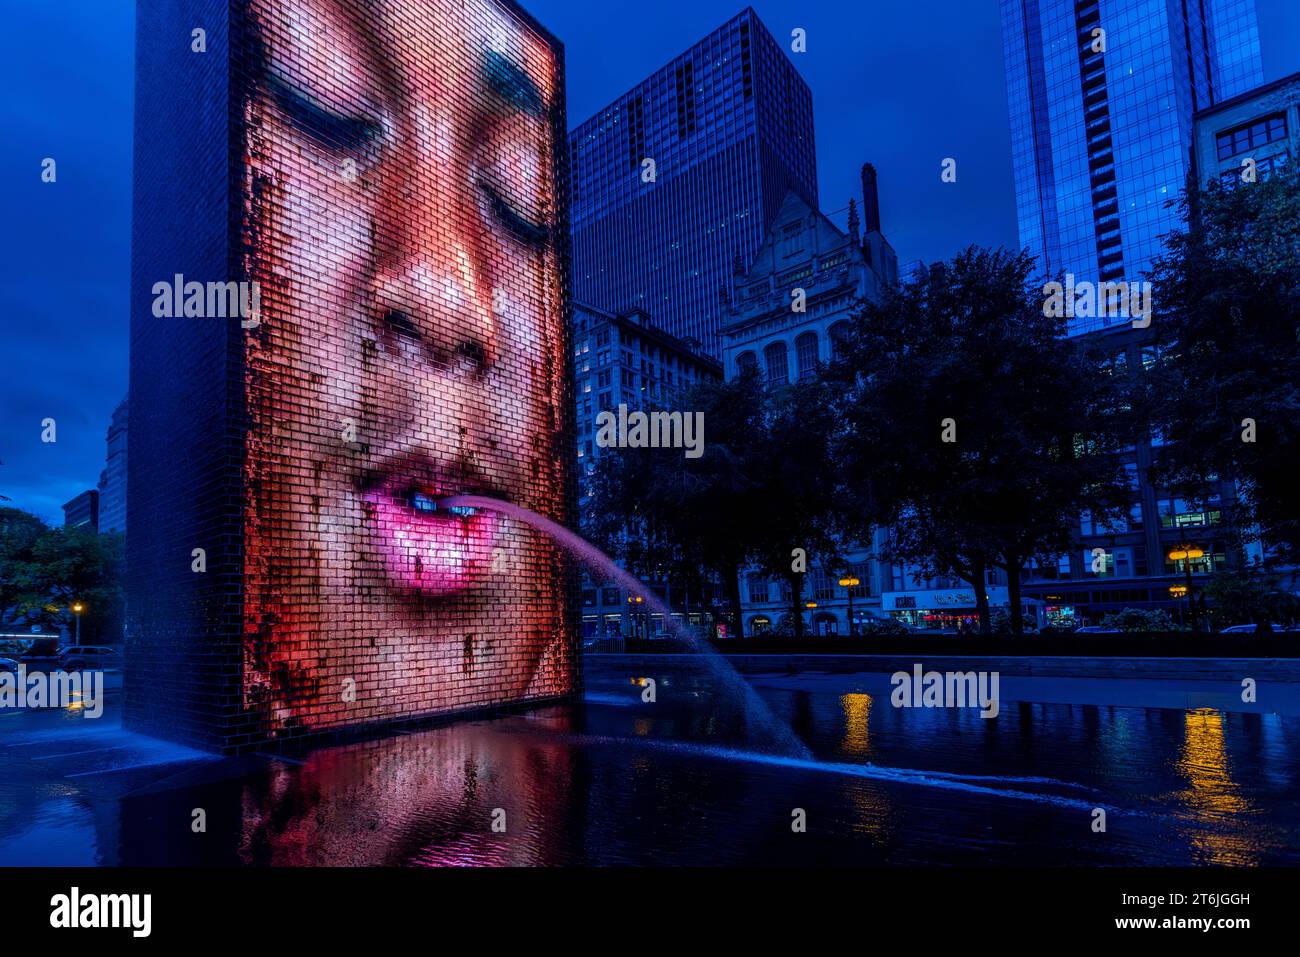 The Crown Fountain is a public sculpture with 2 50-ft. LED towers & a reflecting pool, by Catalan artist Jaume Plensa in Chicago, United States Stock Photo